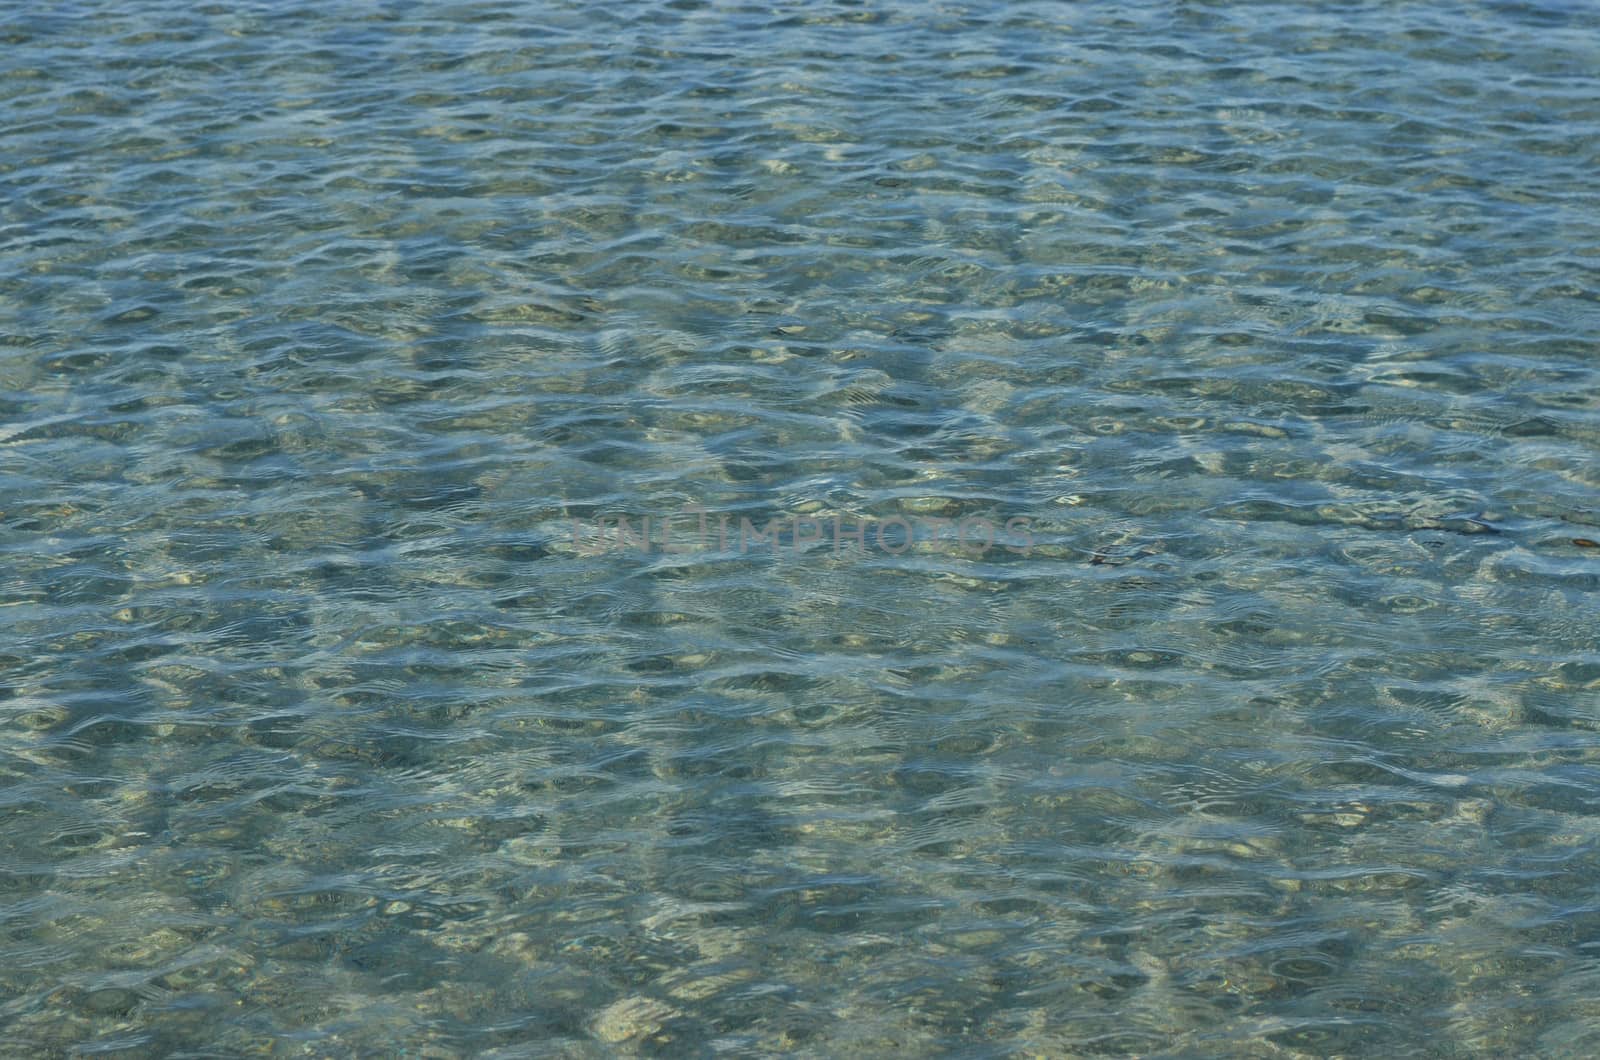 Blue clear sea surface with ripples

